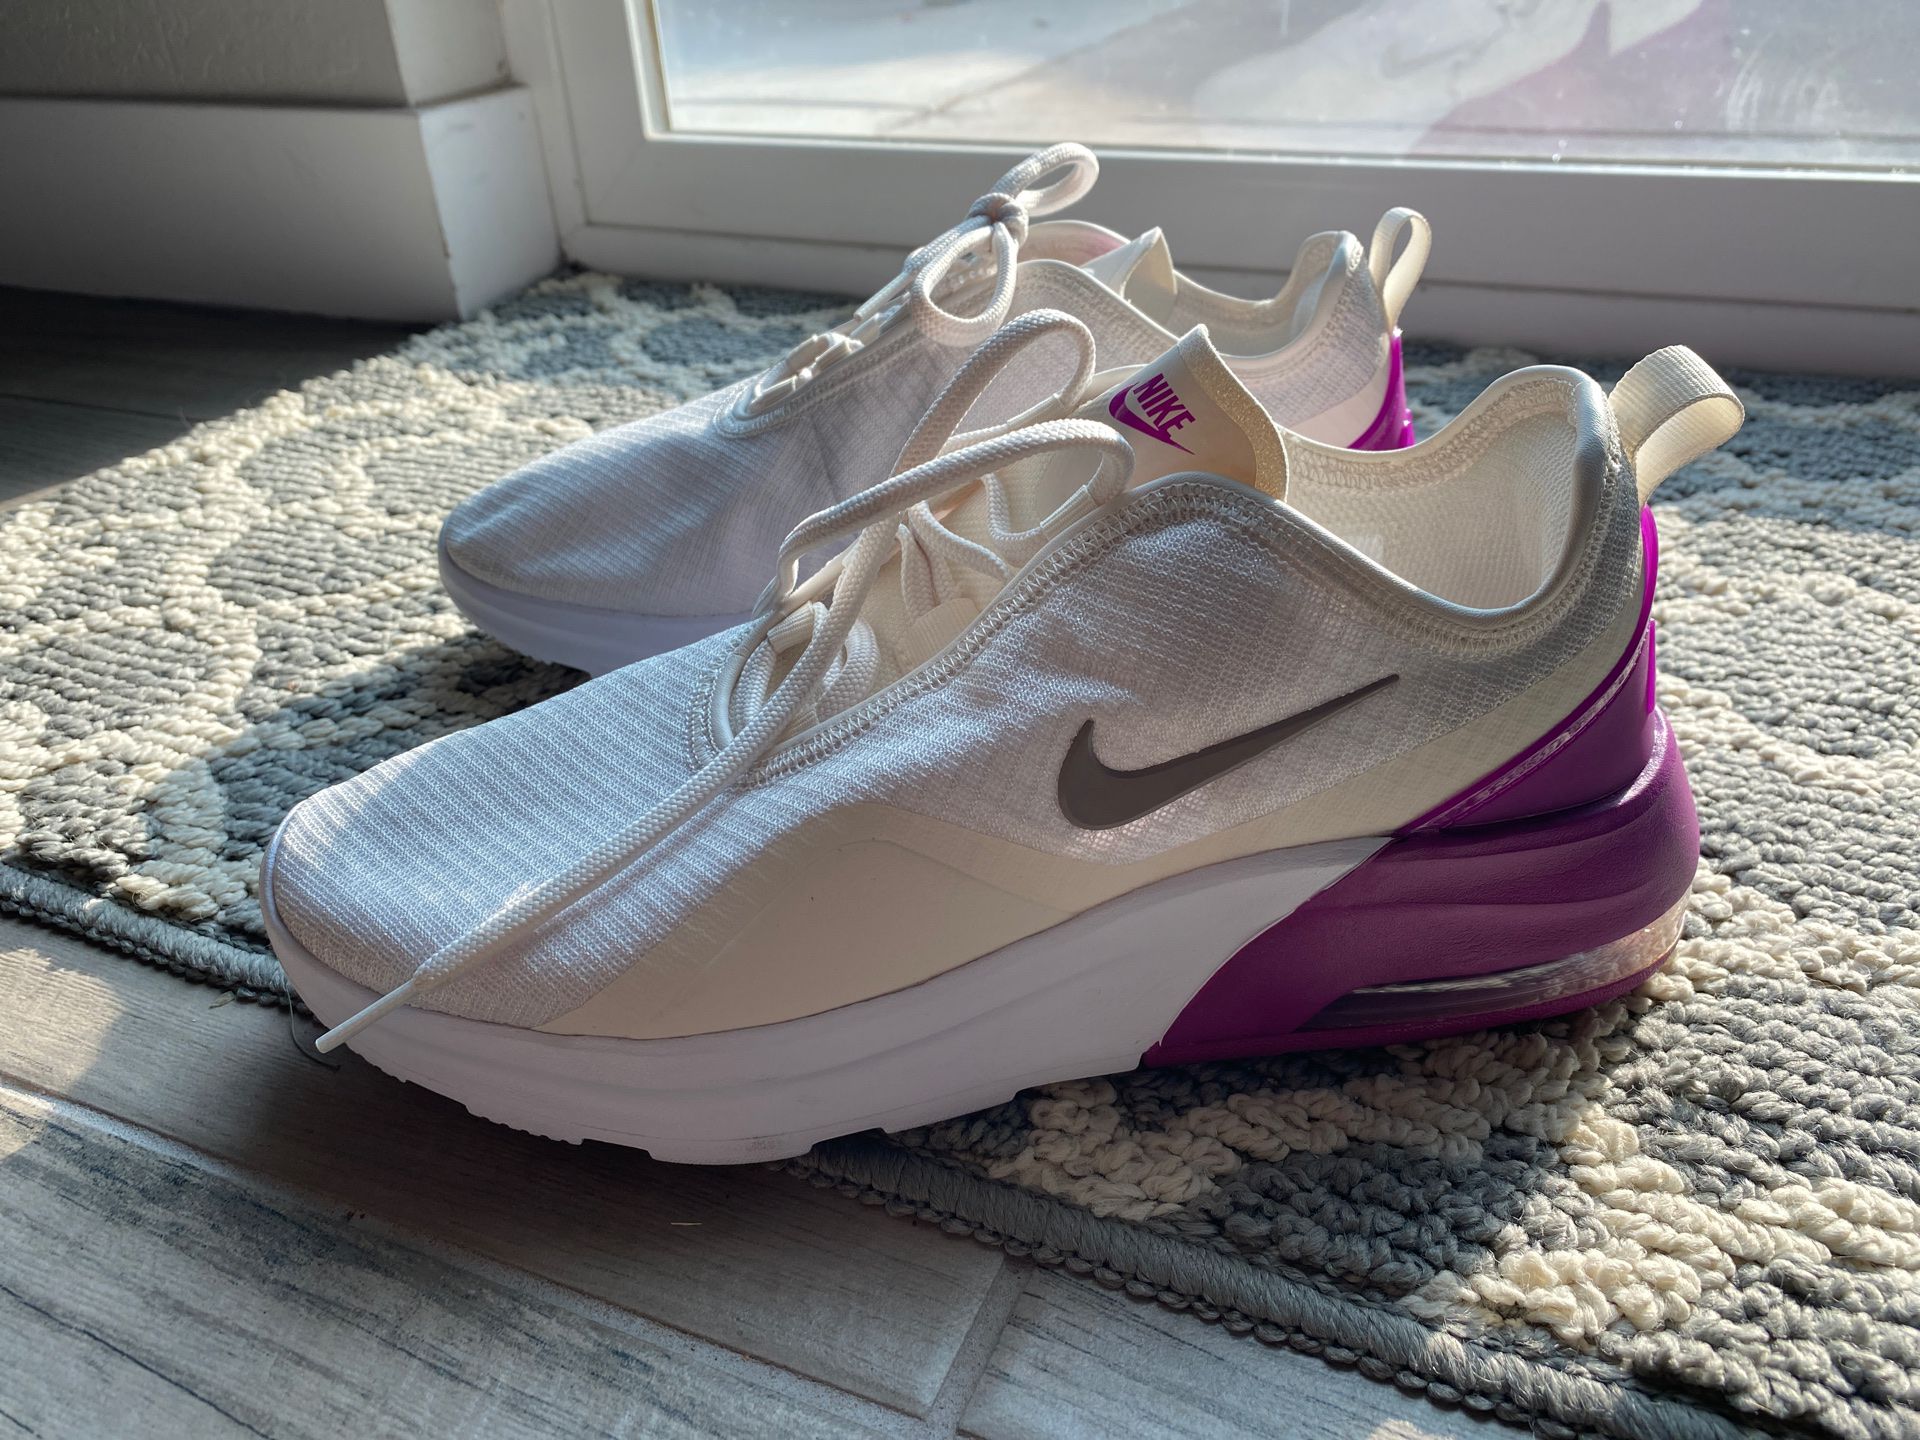 Women’s Nike new Air Max Motion 2 running shoe, size 8.5 eur40